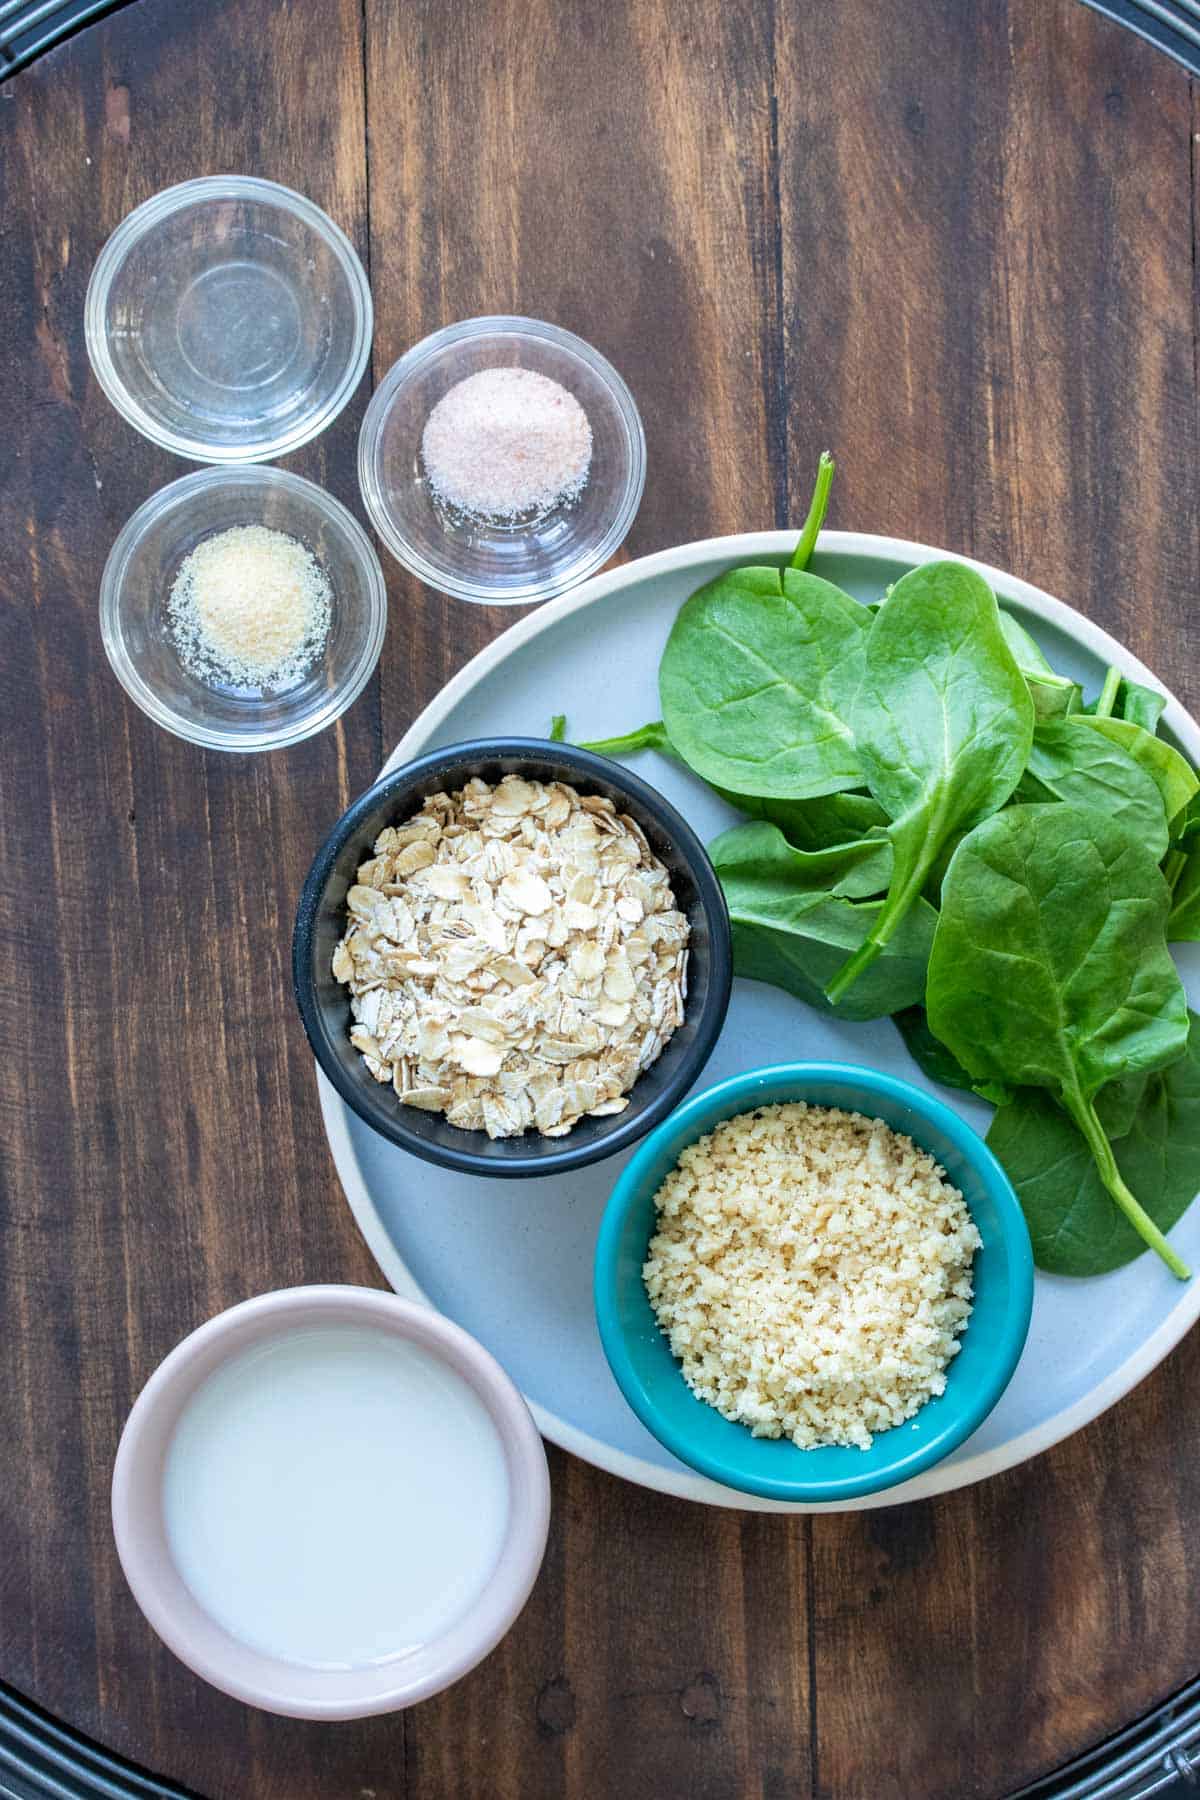 Plate and bowls with ingredients needed to make a spinach oatmeal